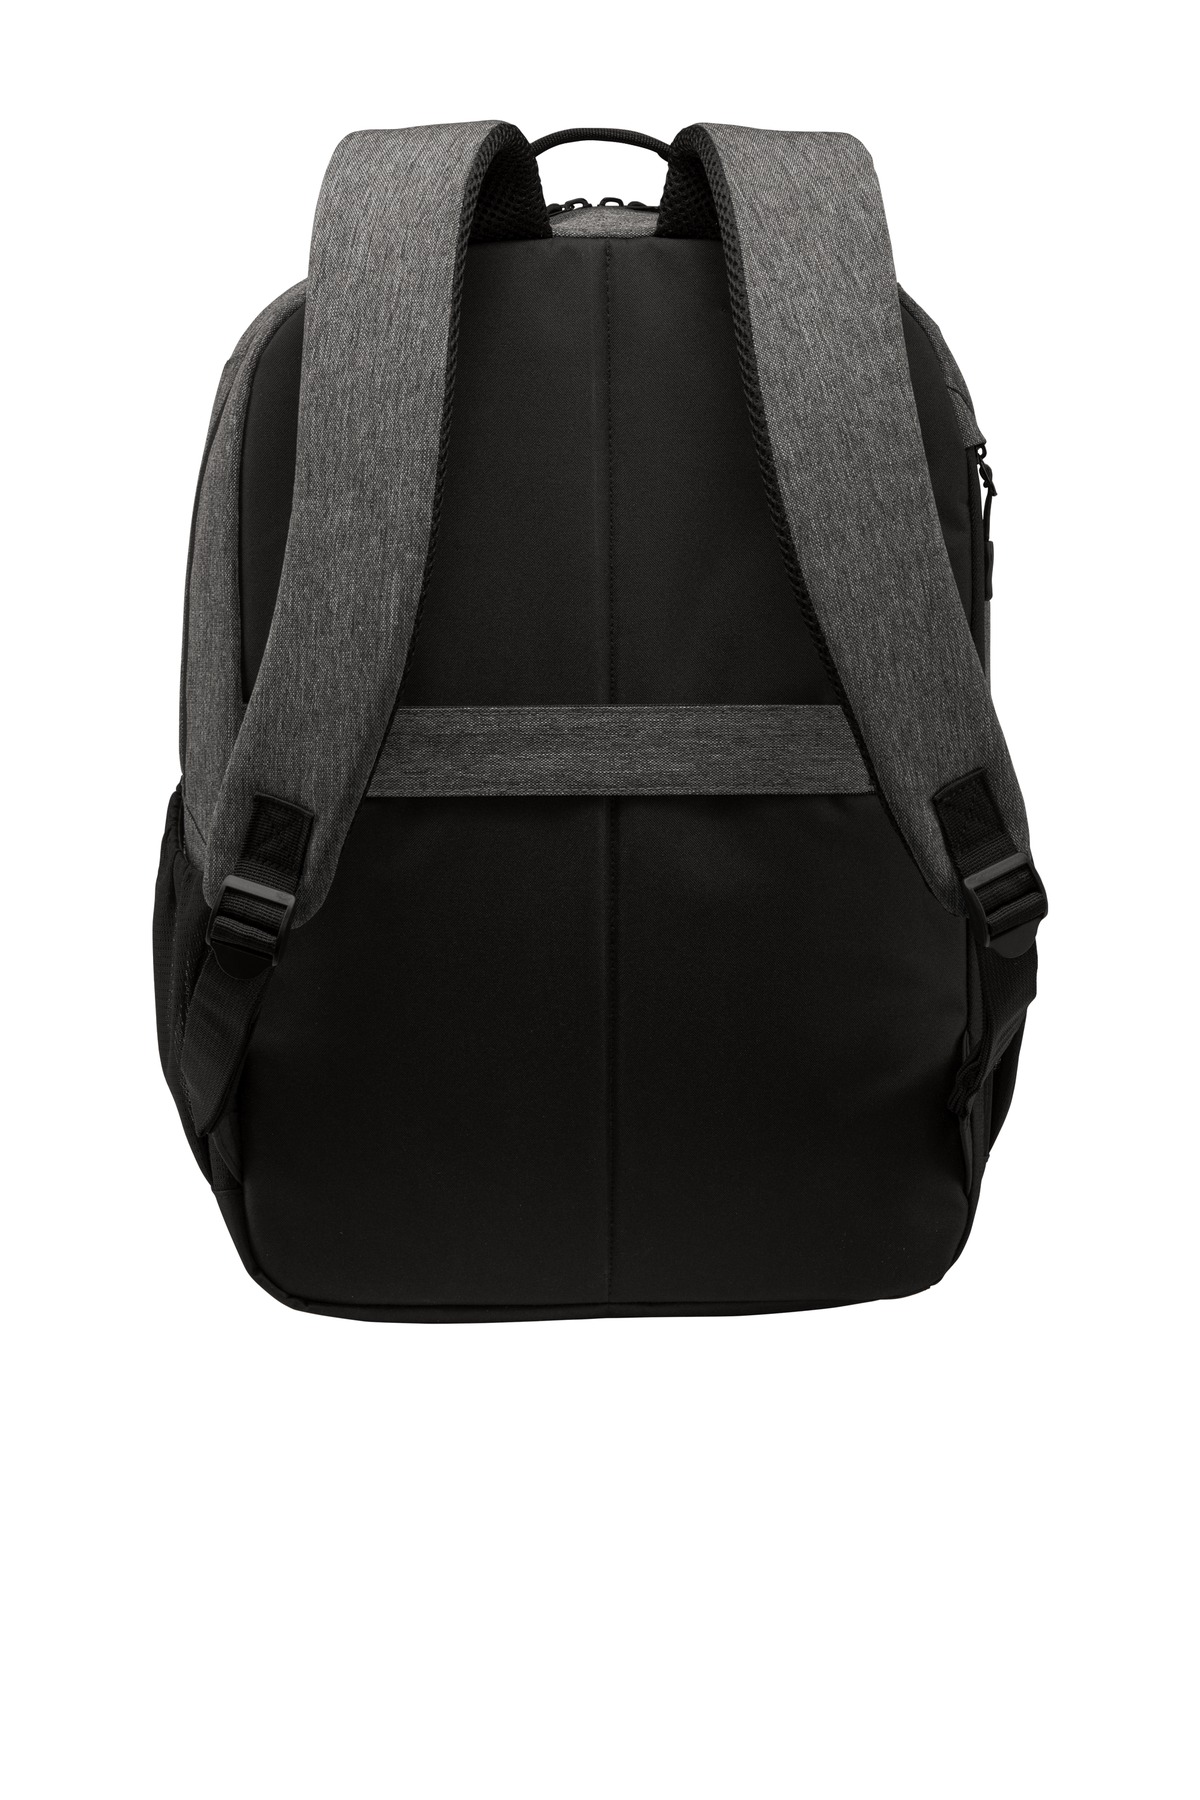 Port Authority Adult Unisex Plain Backpack Grey Heather One Size Fits All - image 3 of 3